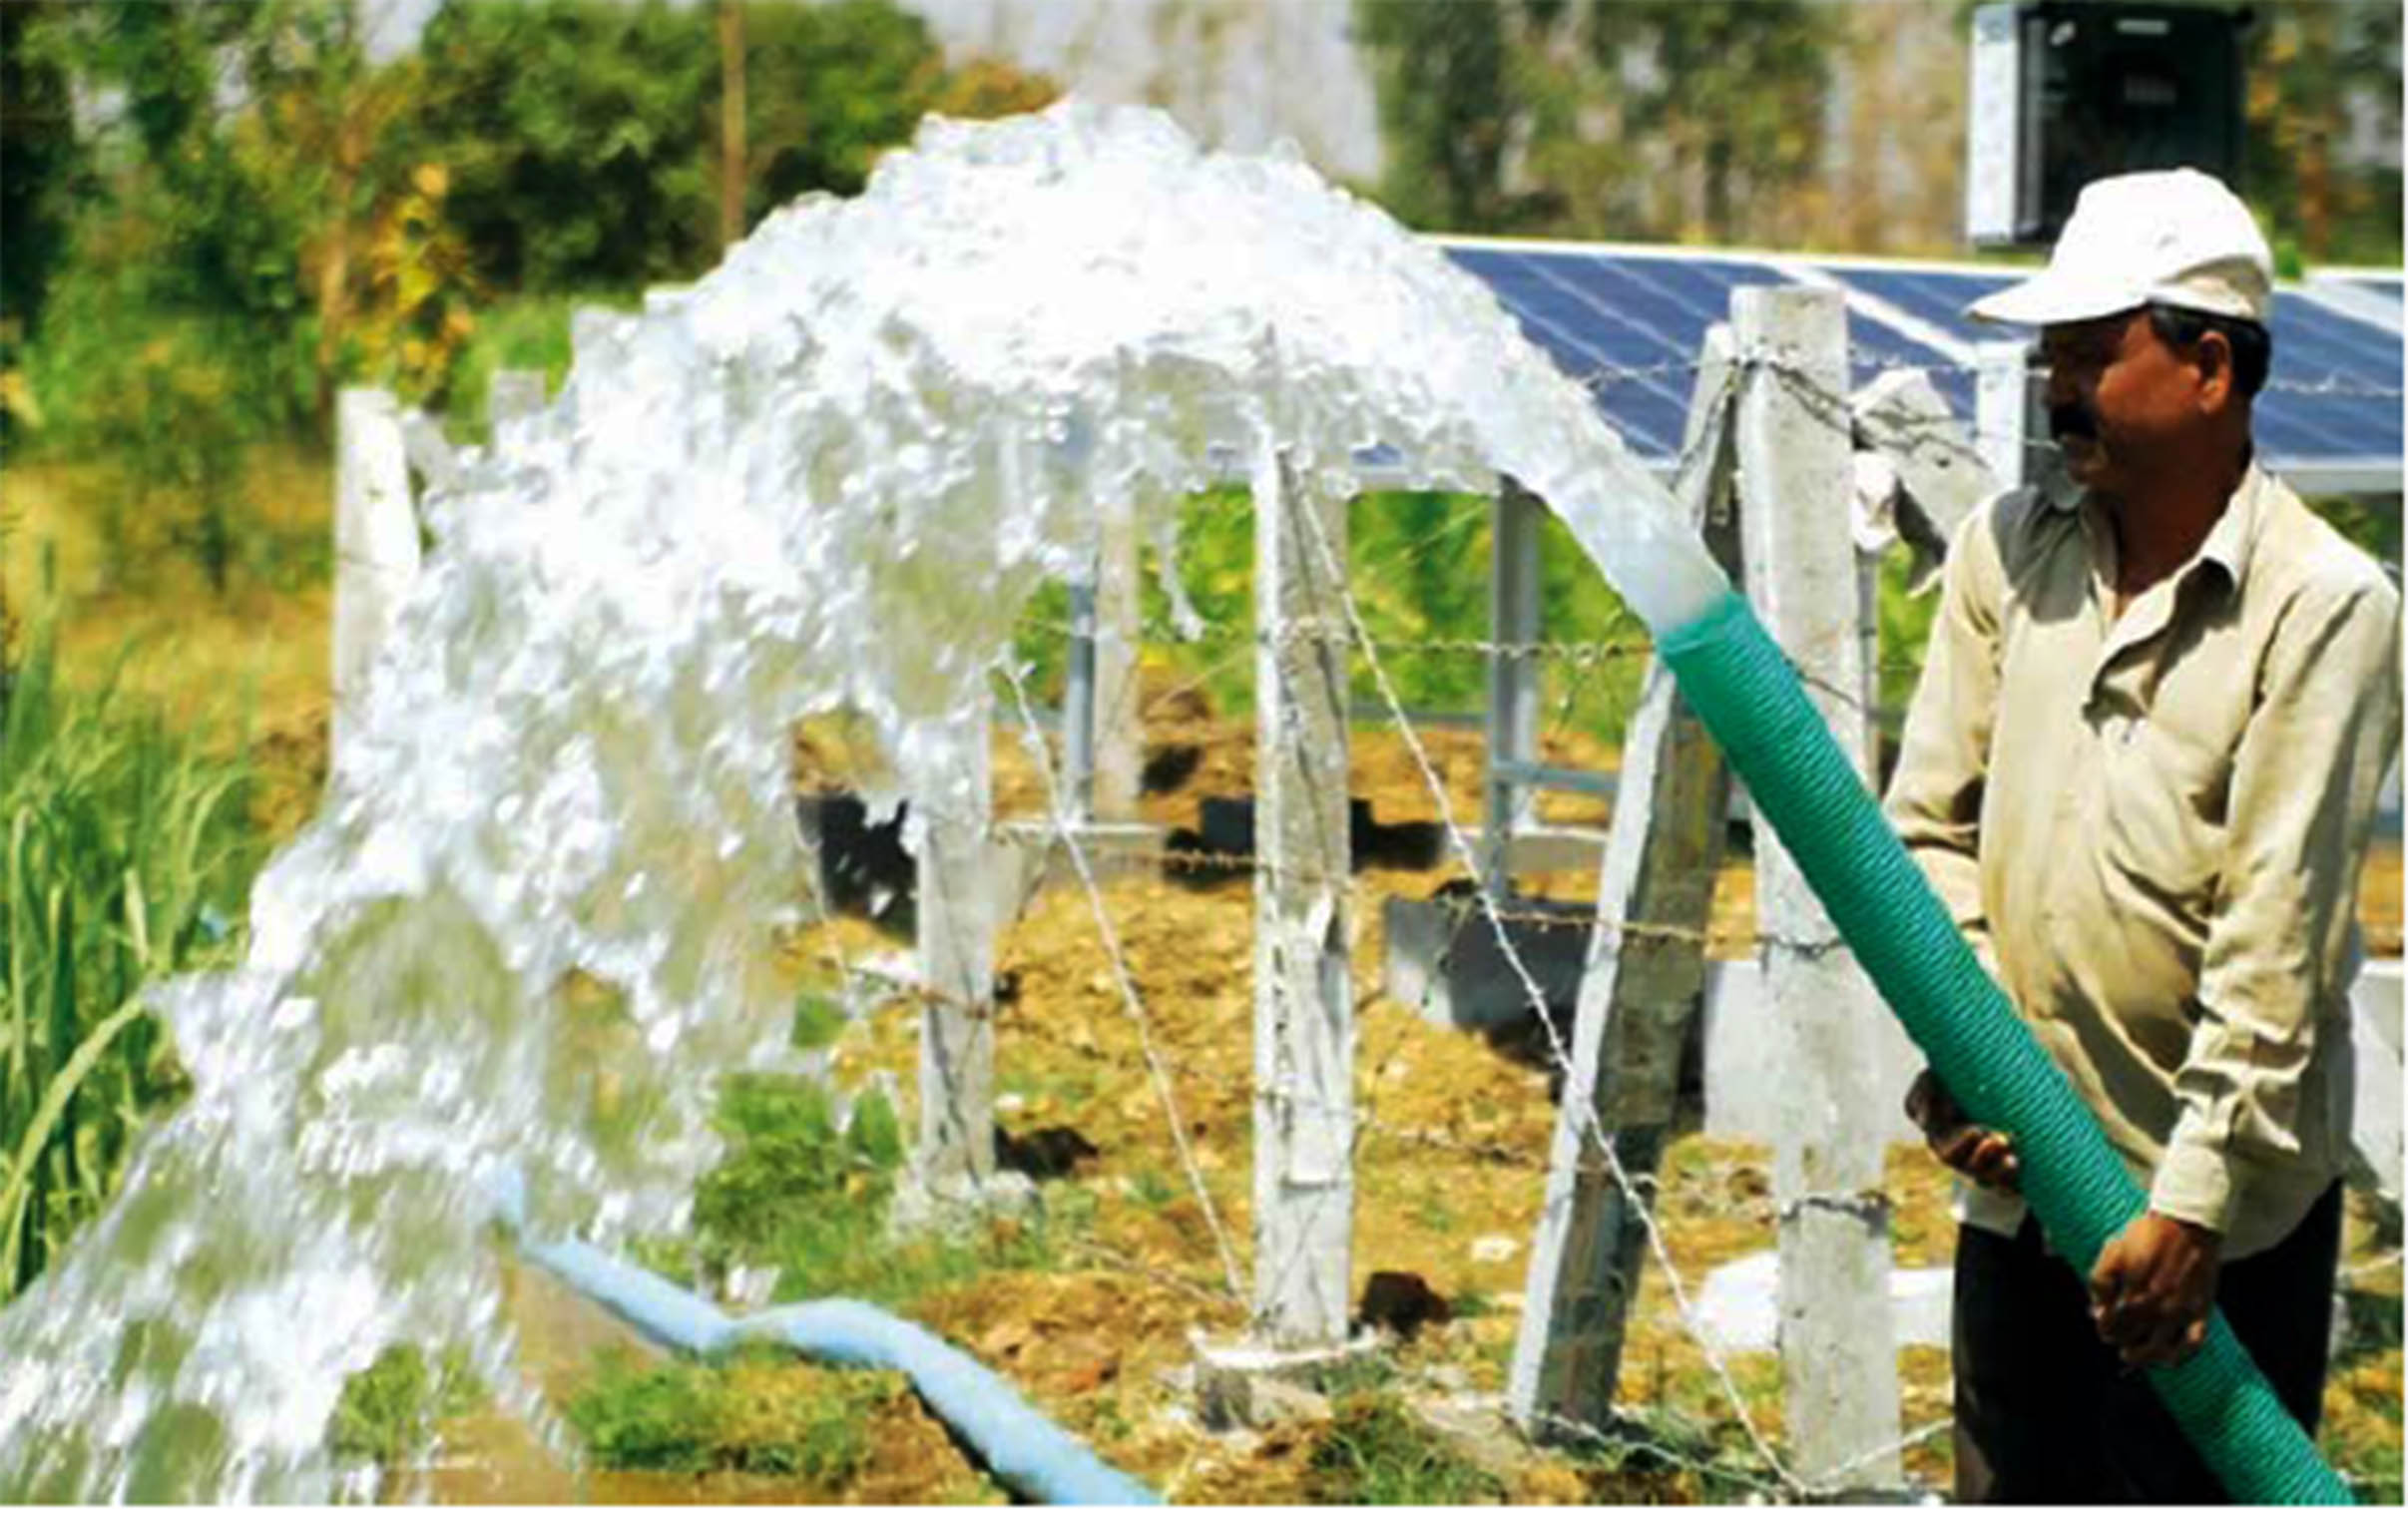 Major economic gains of the project include increase in water use which has increased the gross area under cultivation and the replacement of diesel with the sun as the source of energy leading to reduction in irrigation costs and also carbon emissions. (Image: AKRSP)